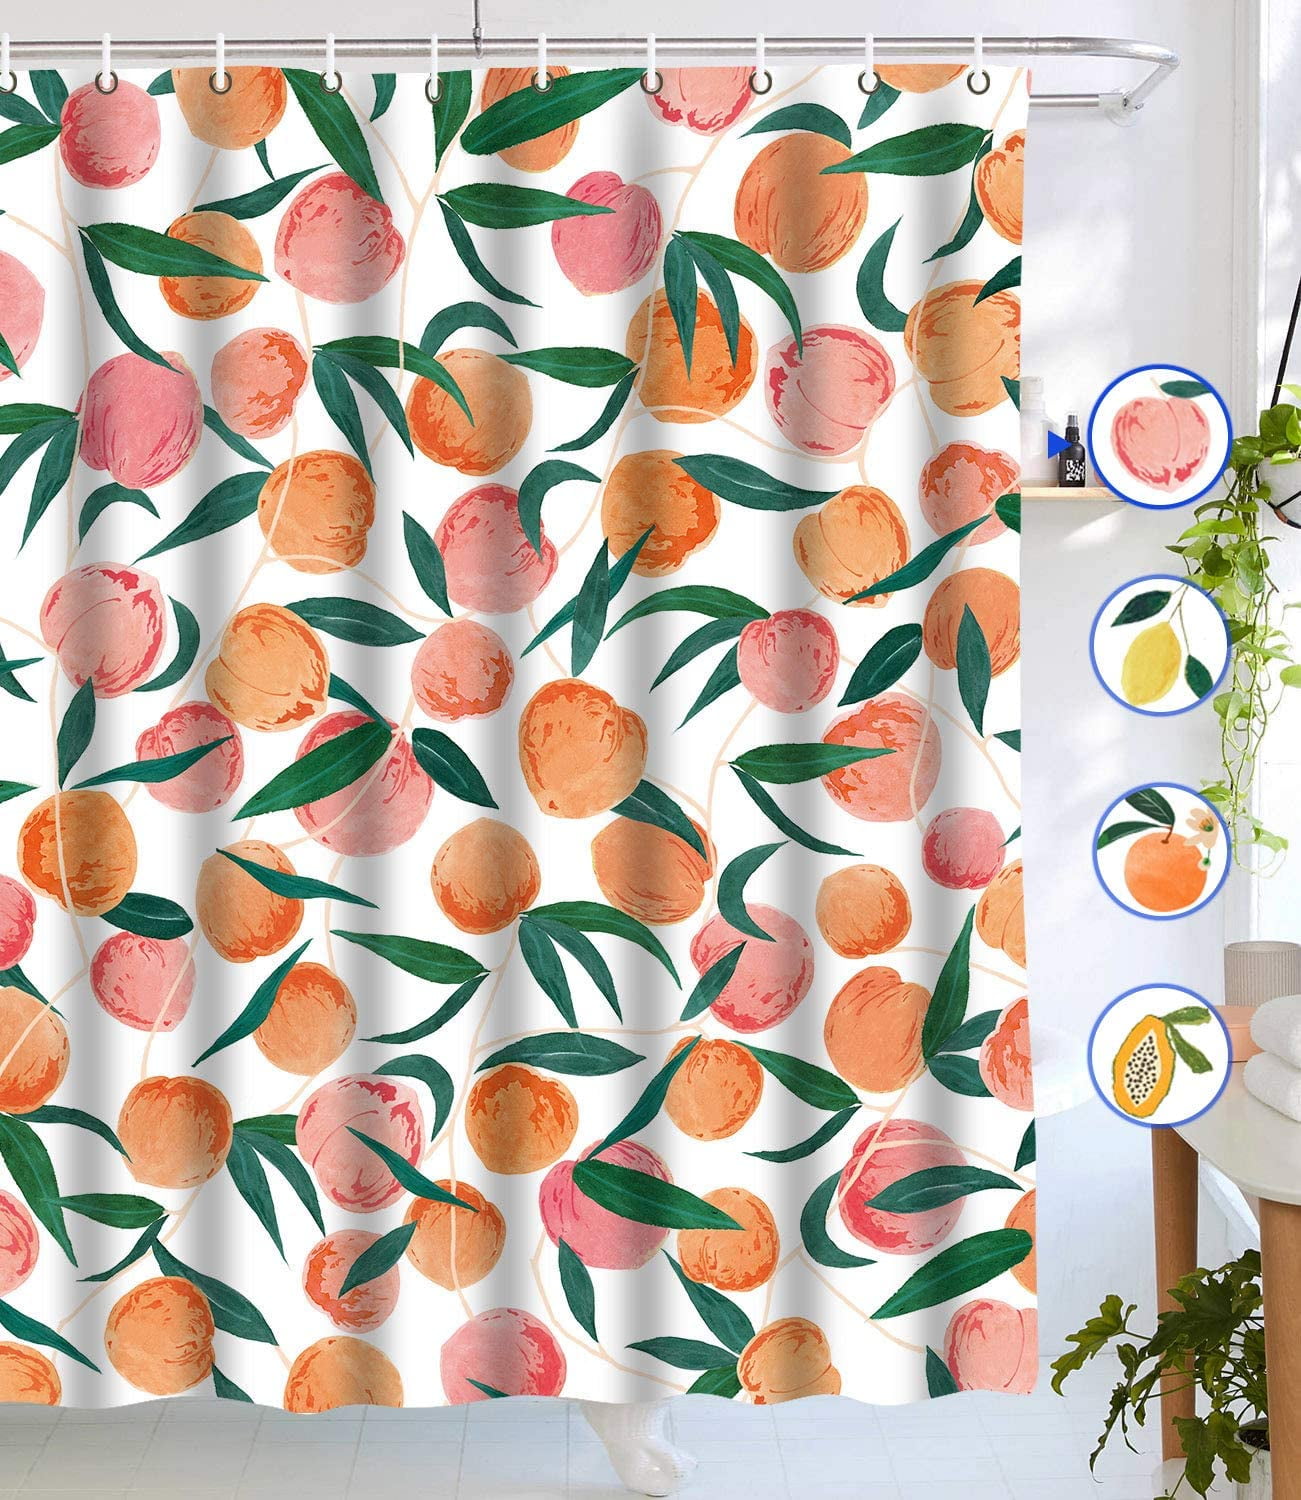 Colorful Fruit Sweet Candy Bathroom Polyester Fabric Shower Curtain Set 12 Hooks 